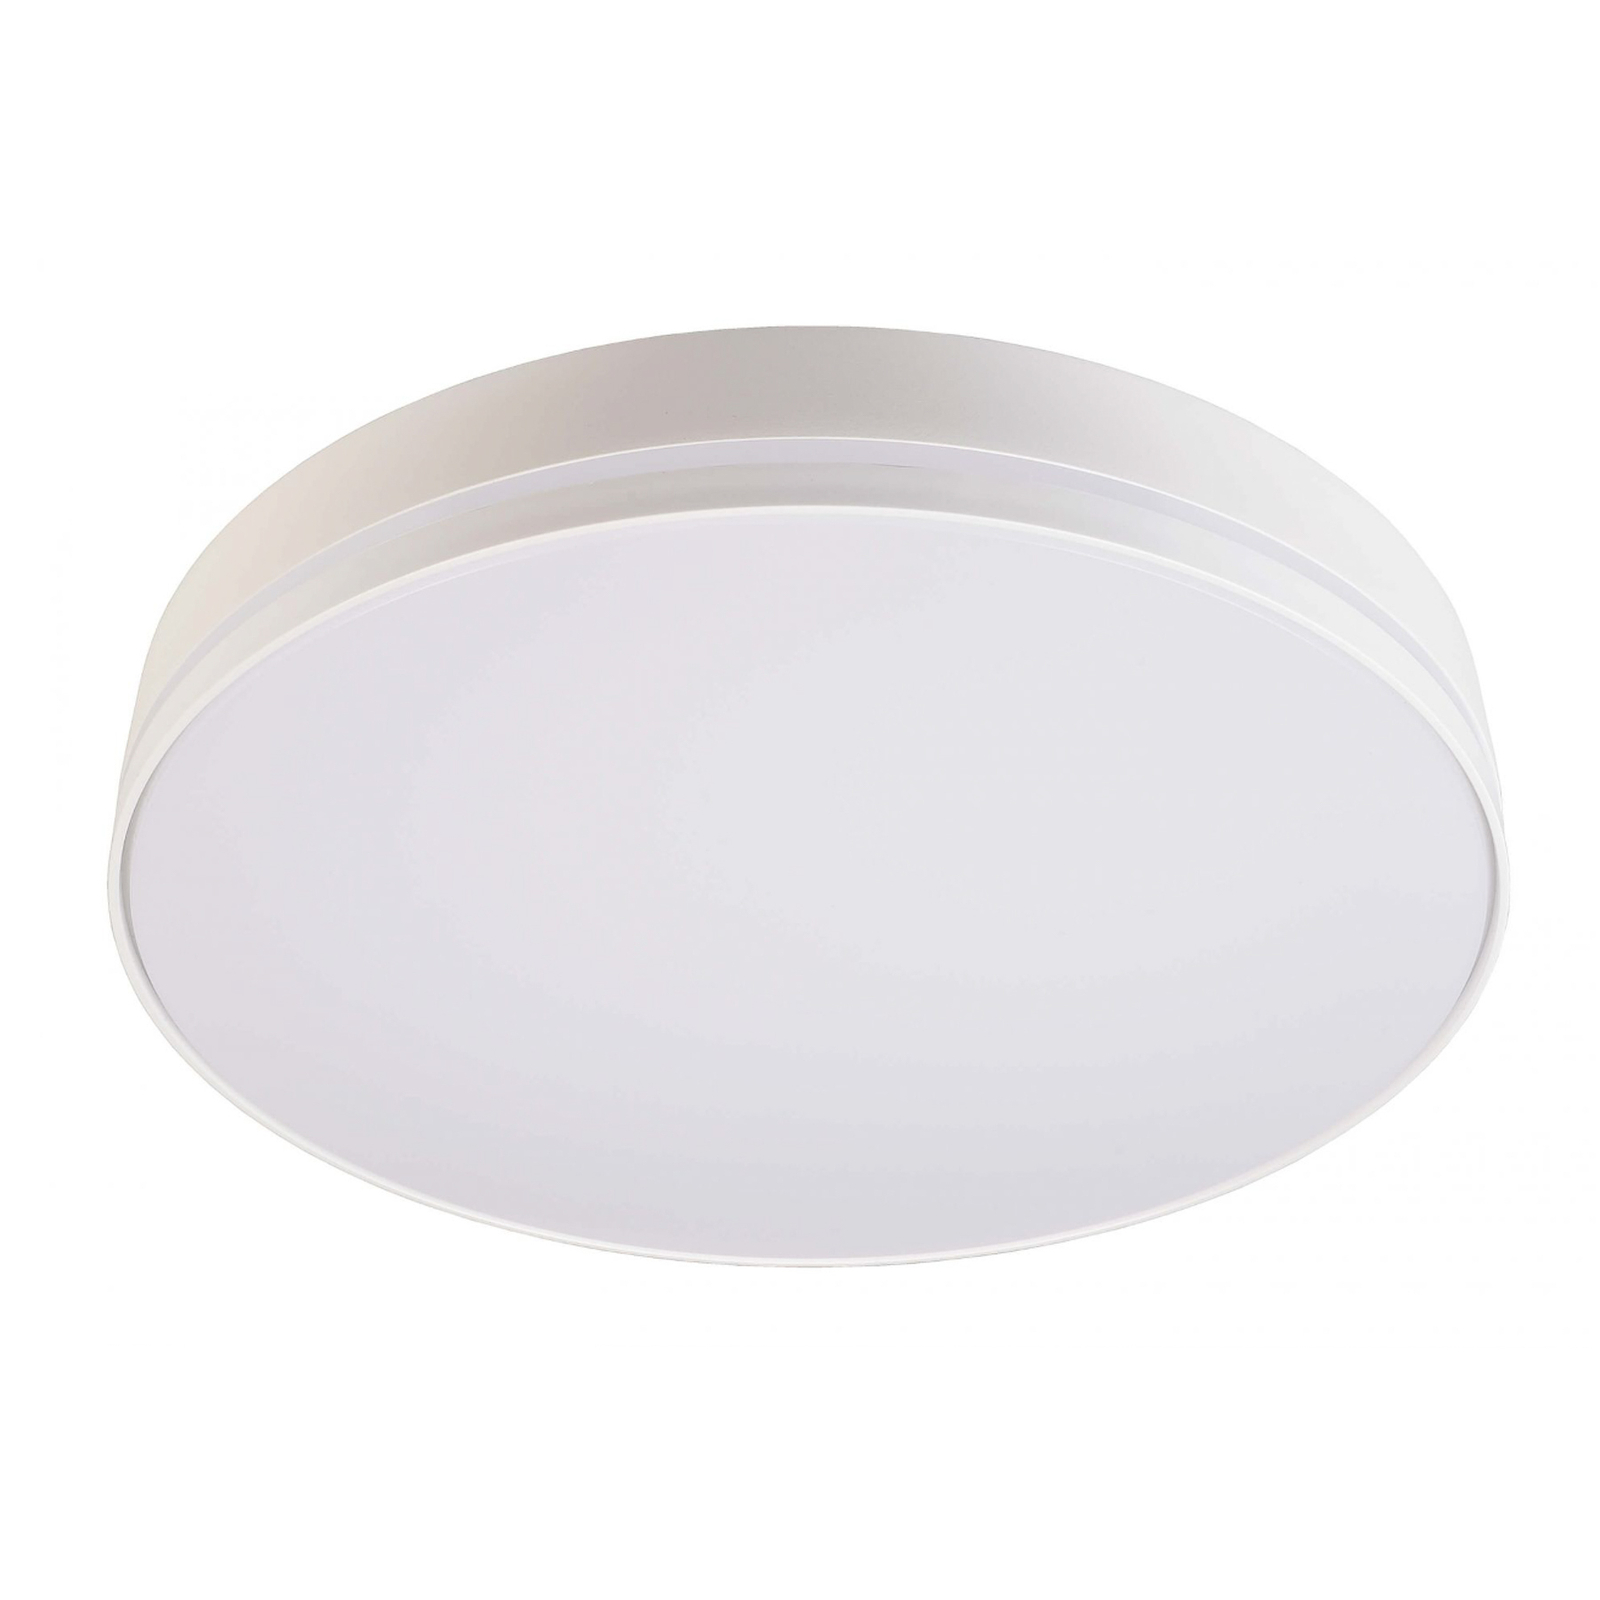 Subra LED ceiling light IP54 TRIAC-dimmable 3,000K